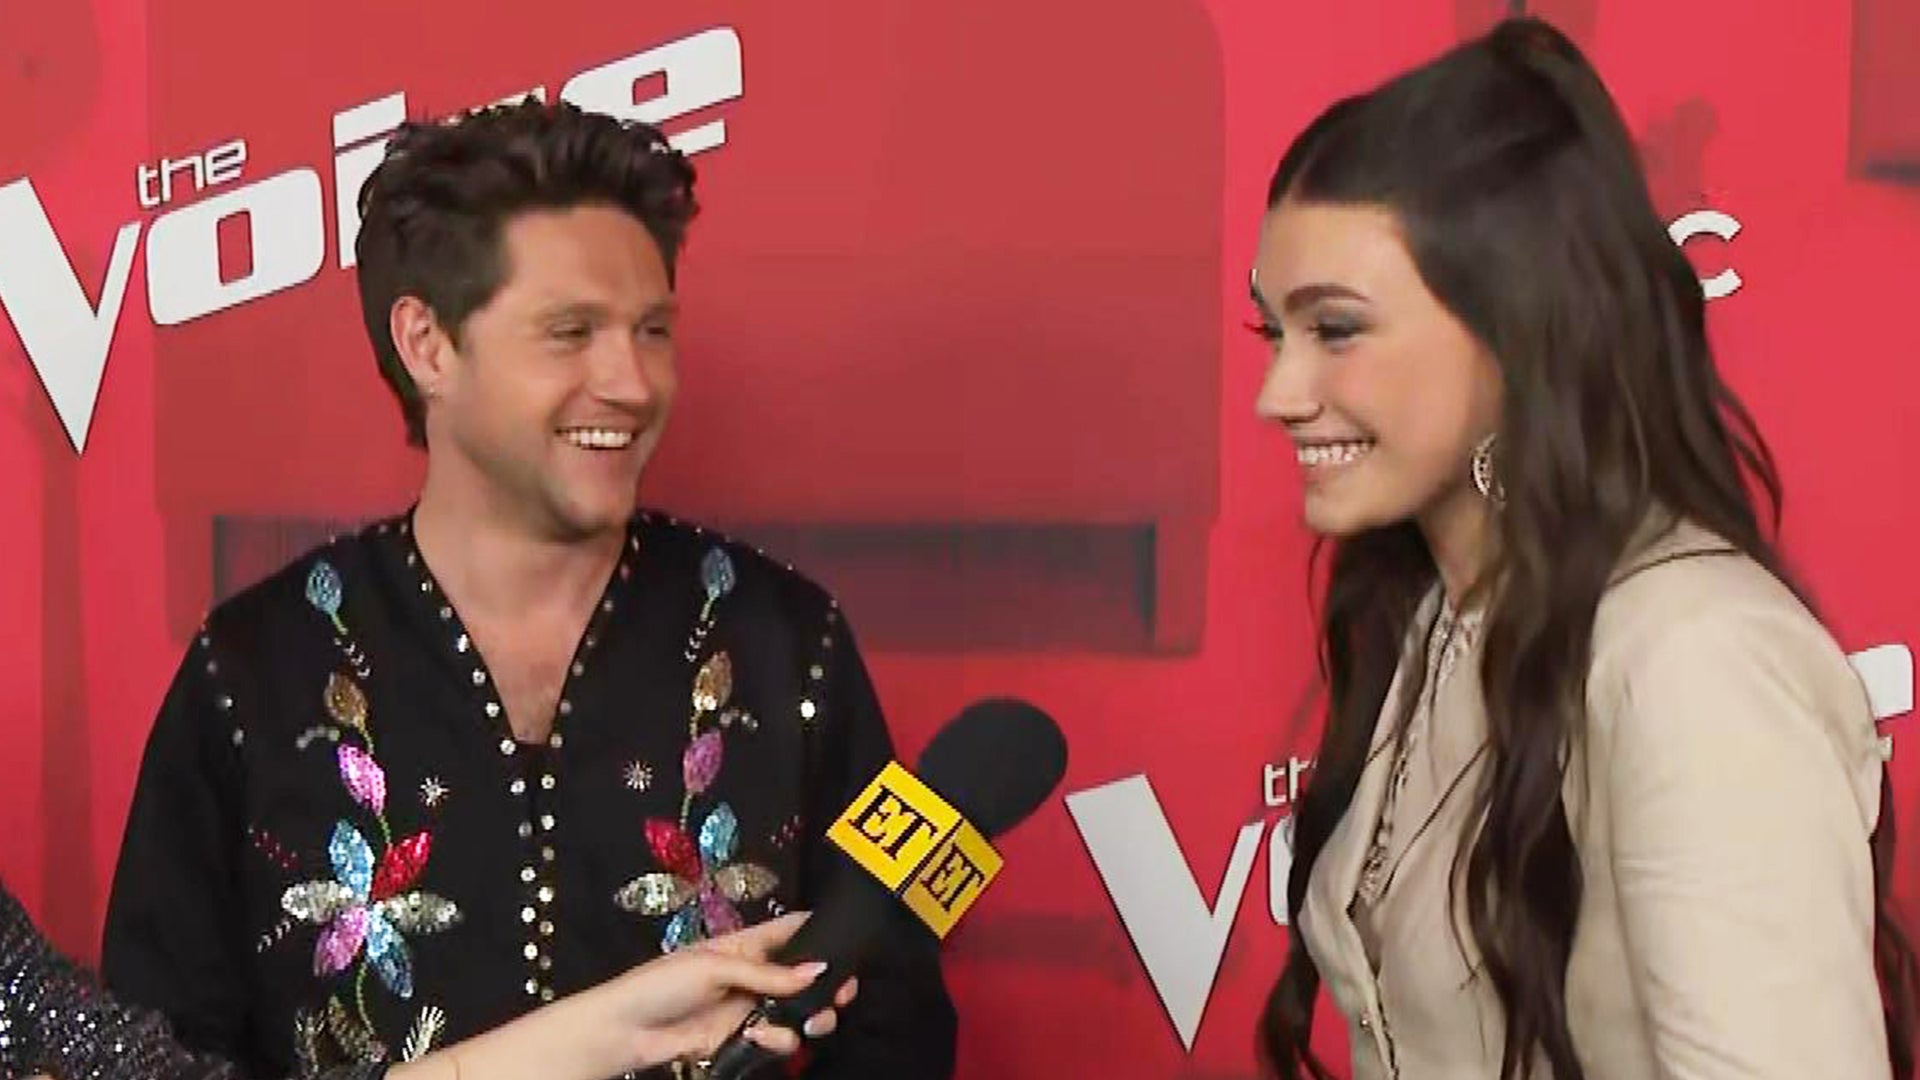 ‘The Voice’: Gina Miles on ‘Crazy’ Win and Words From Niall Horan About ‘TV Dad’ Blake Shelton